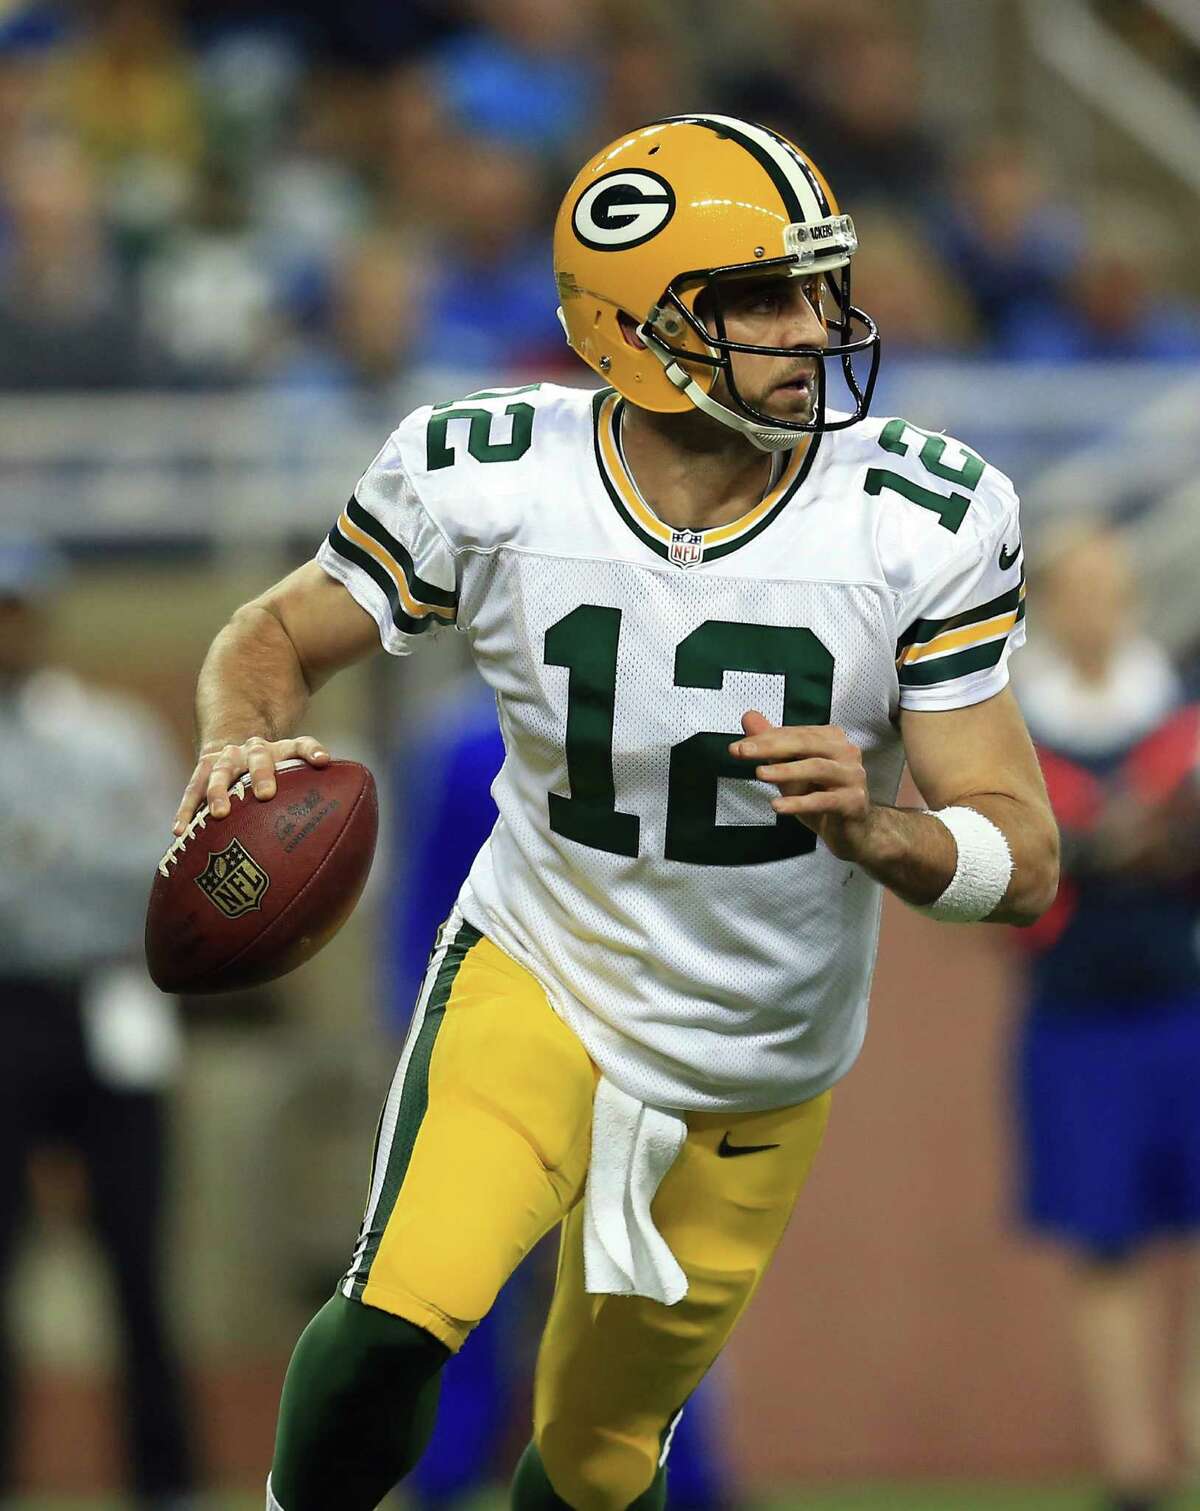 DETROIT, MI - DECEMBER 3: Quarterback Aaron Rodgers #12 of the Green Bay Packers rolls out to pass during the second quarter against the Detroit Lions at Ford Field on December 3, 2015 in Detroit, Michigan. (Photo by Andrew Weber/Getty Images) ORG XMIT: 587435471